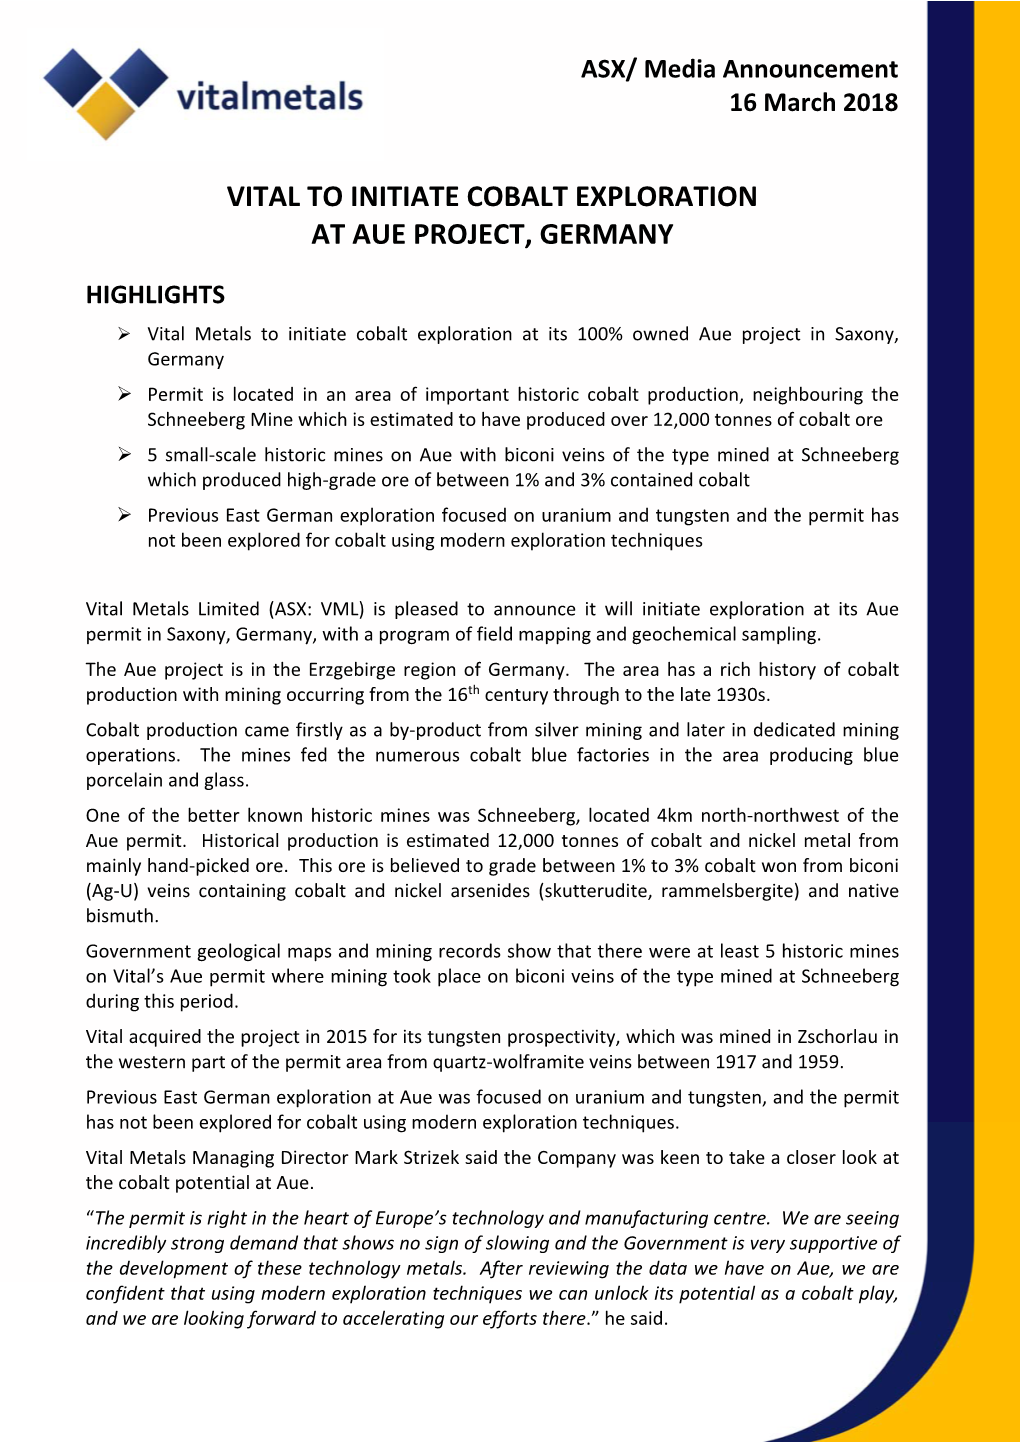 Vital to Initiate Cobalt Exploration at Aue Project, Germany